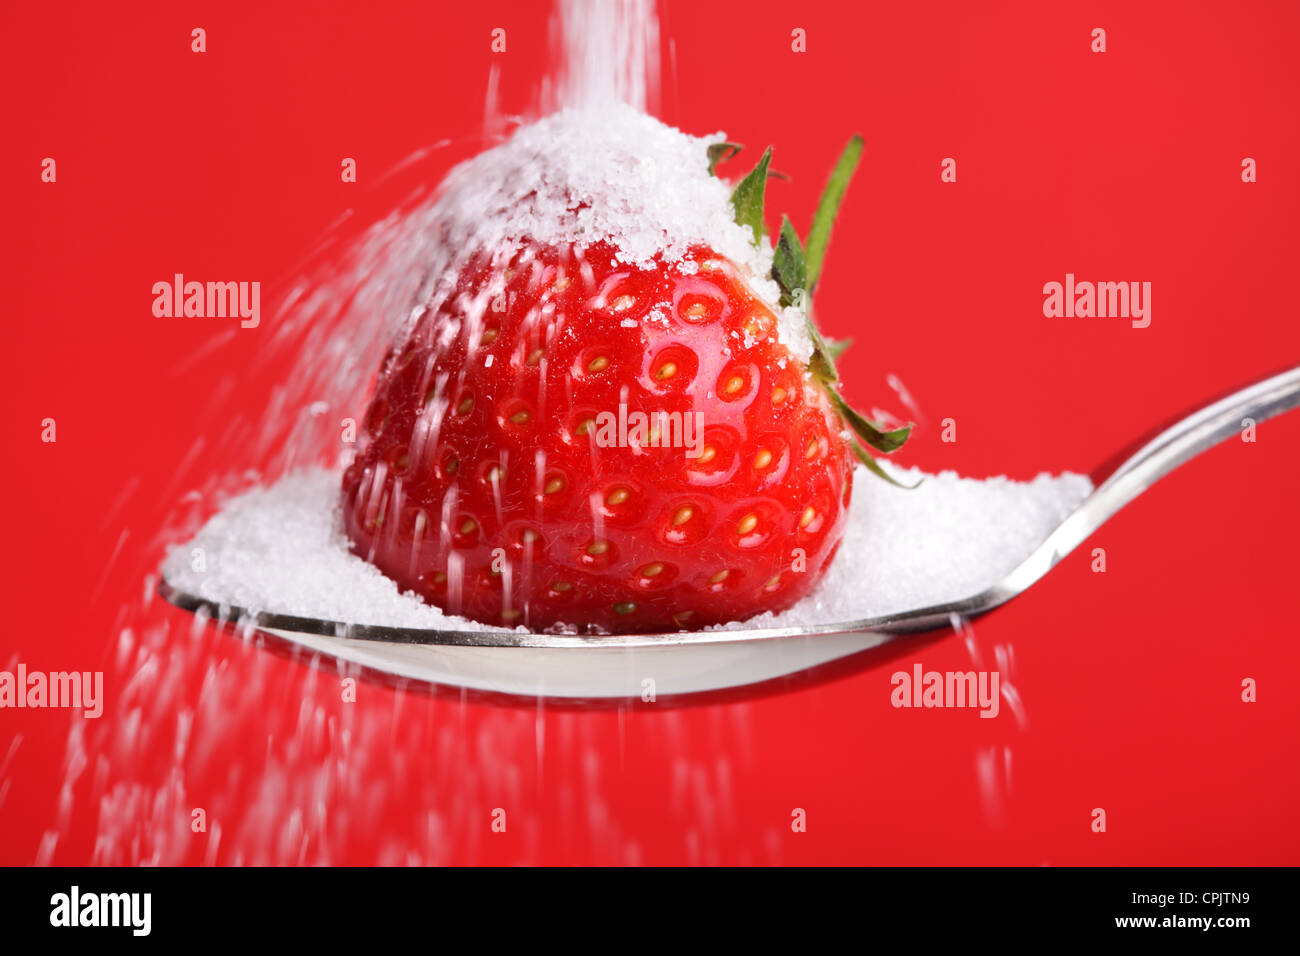 Strawberry on spoon with sugar Stock Photo